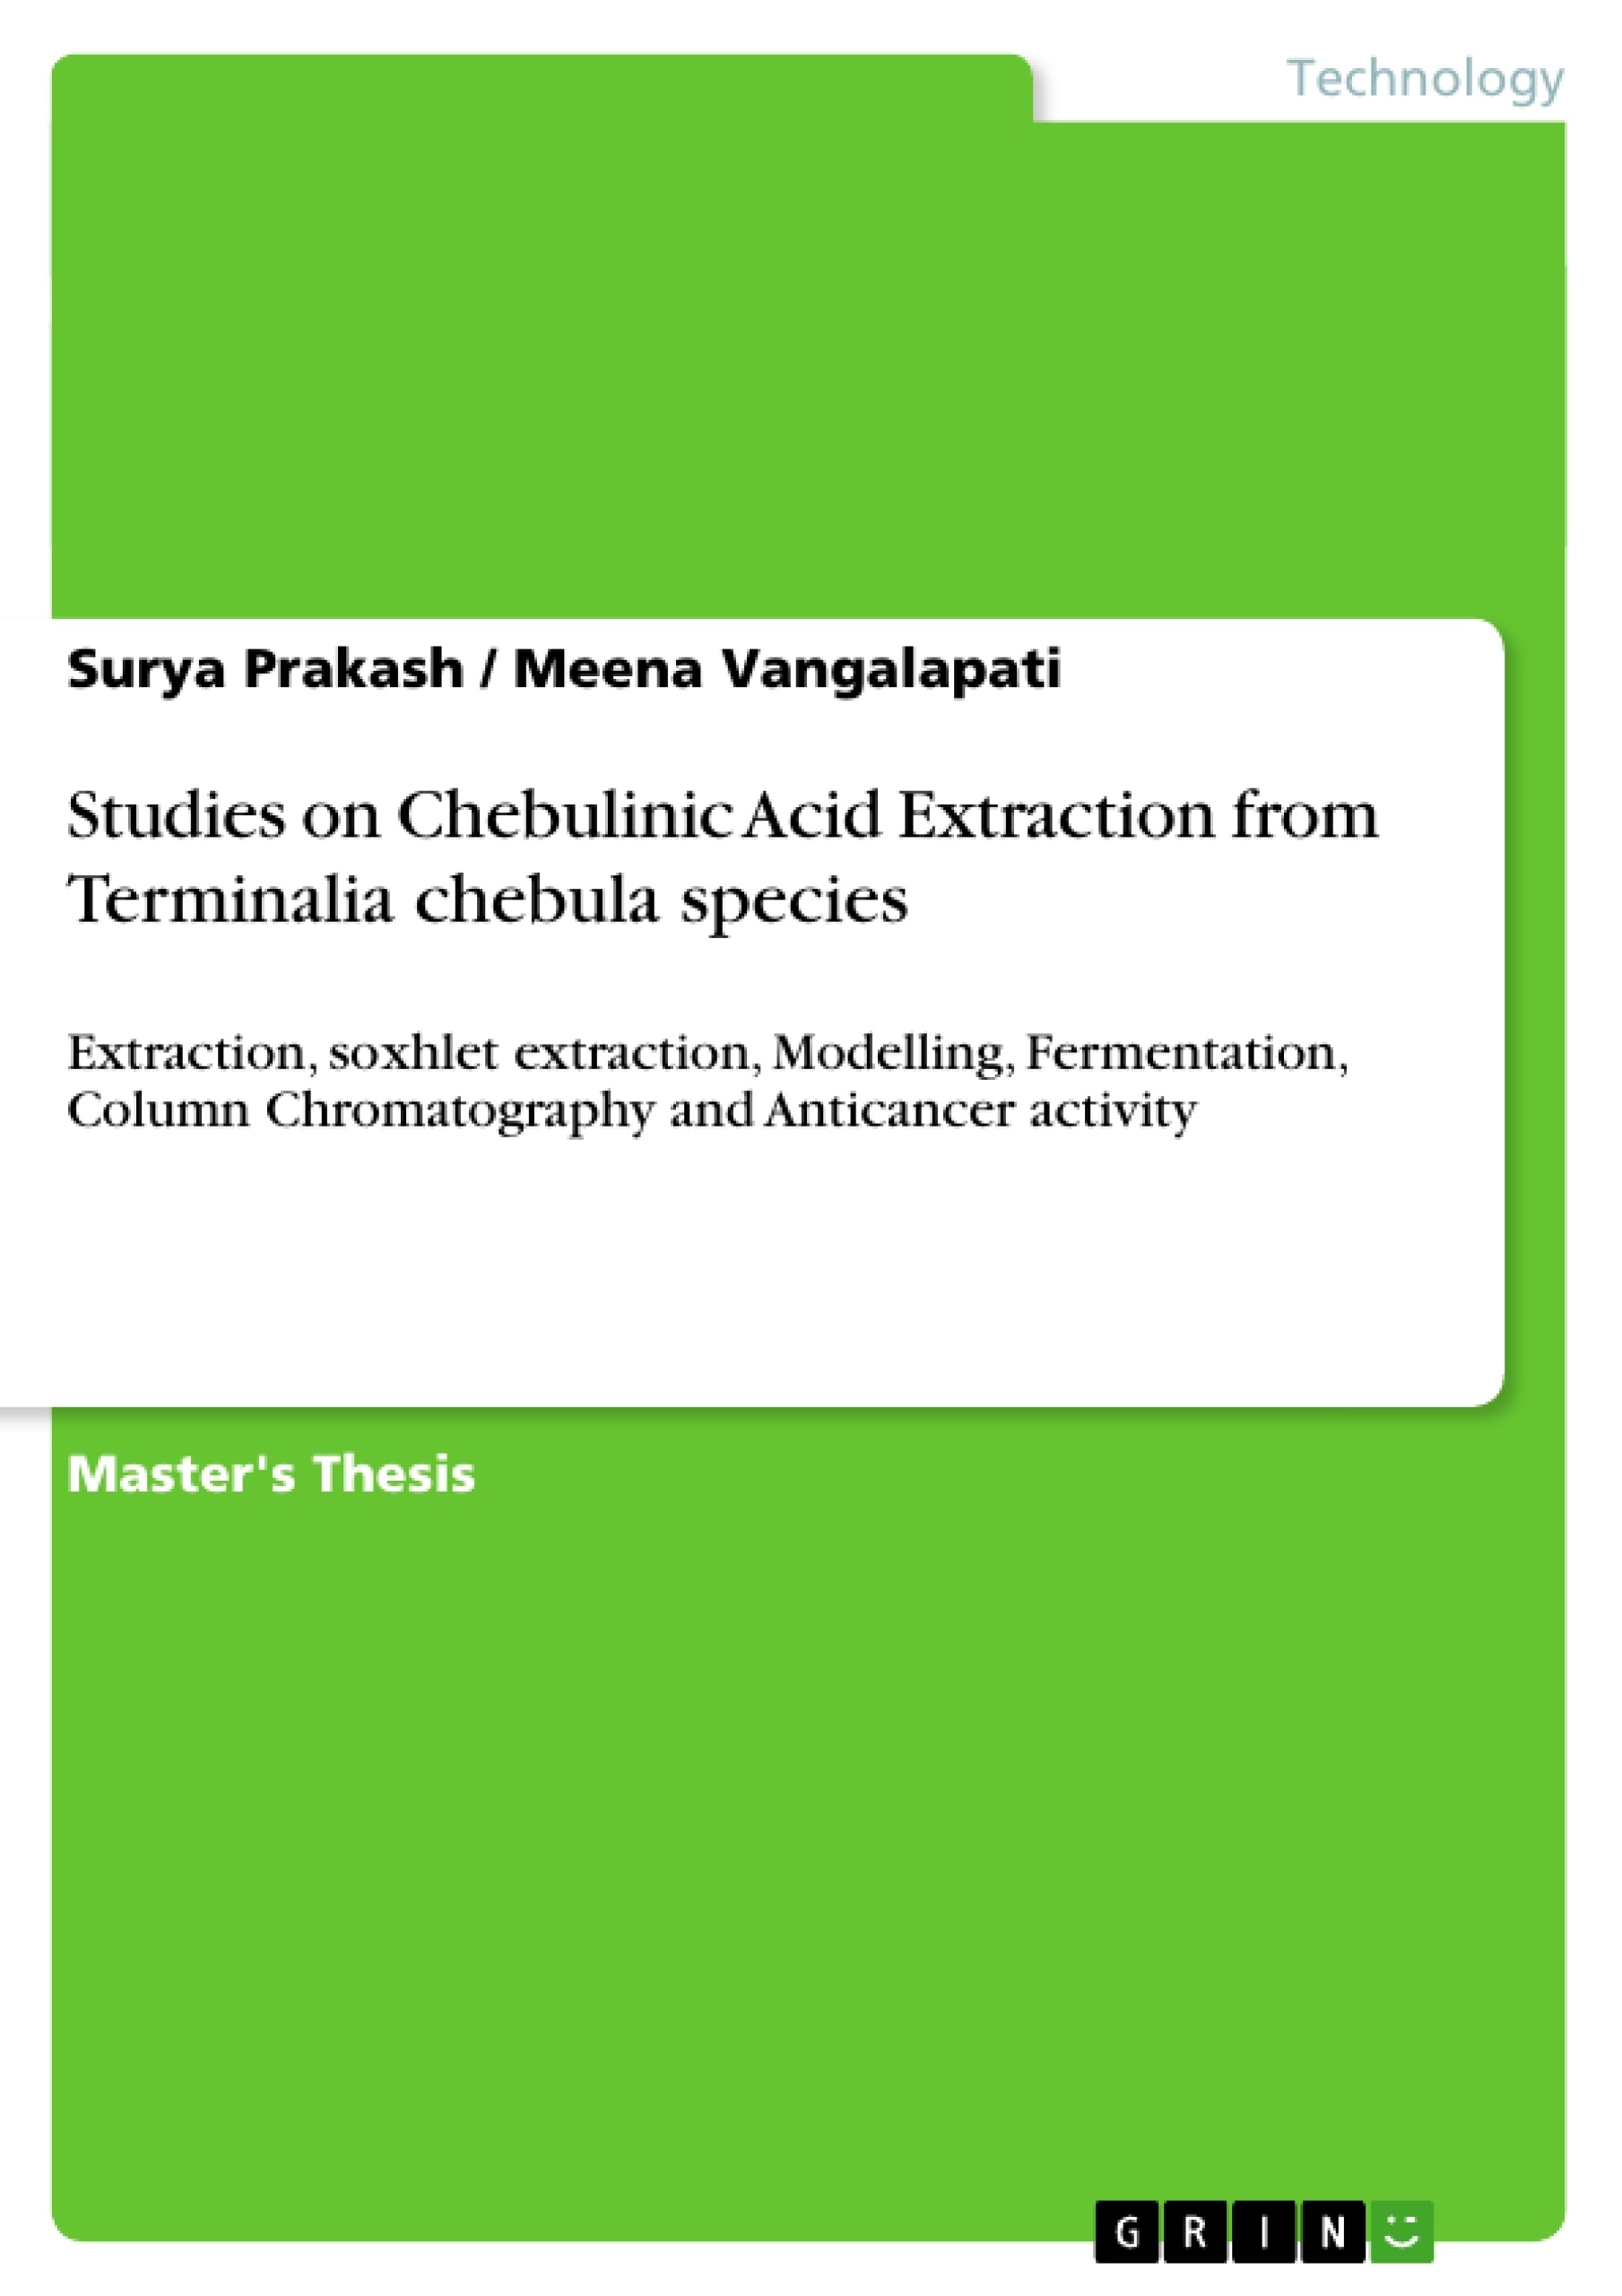 Title: Studies on Chebulinic Acid Extraction from Terminalia chebula species